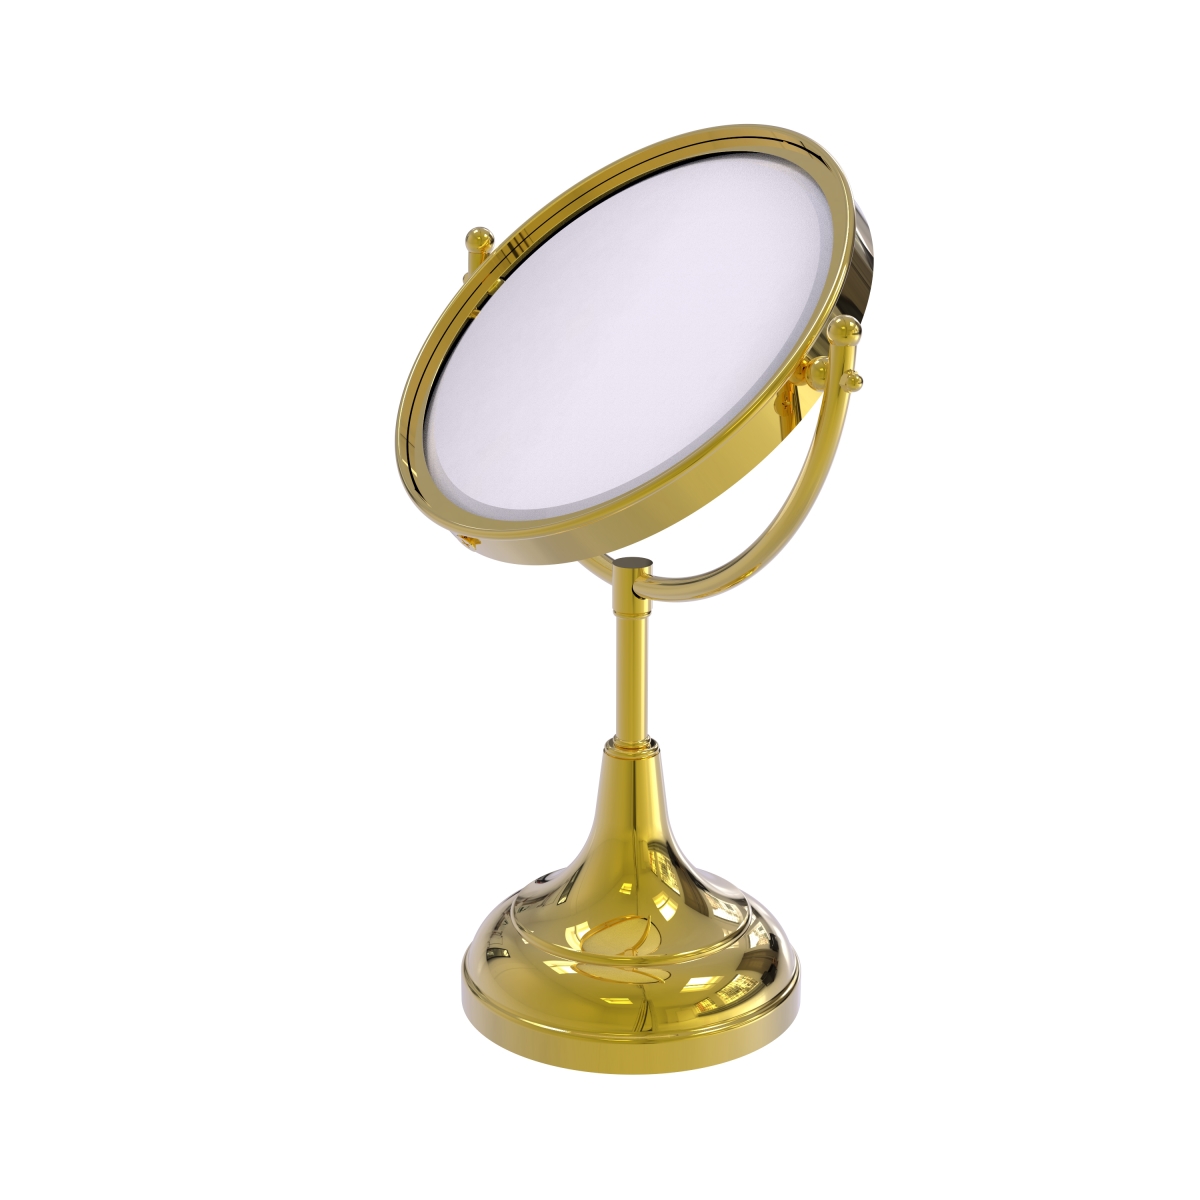 Dm-2-3x-unl Smooth Ring Style 8 In. Vanity Top Make-up Mirror 3x Magnification, Unlacquered Brass